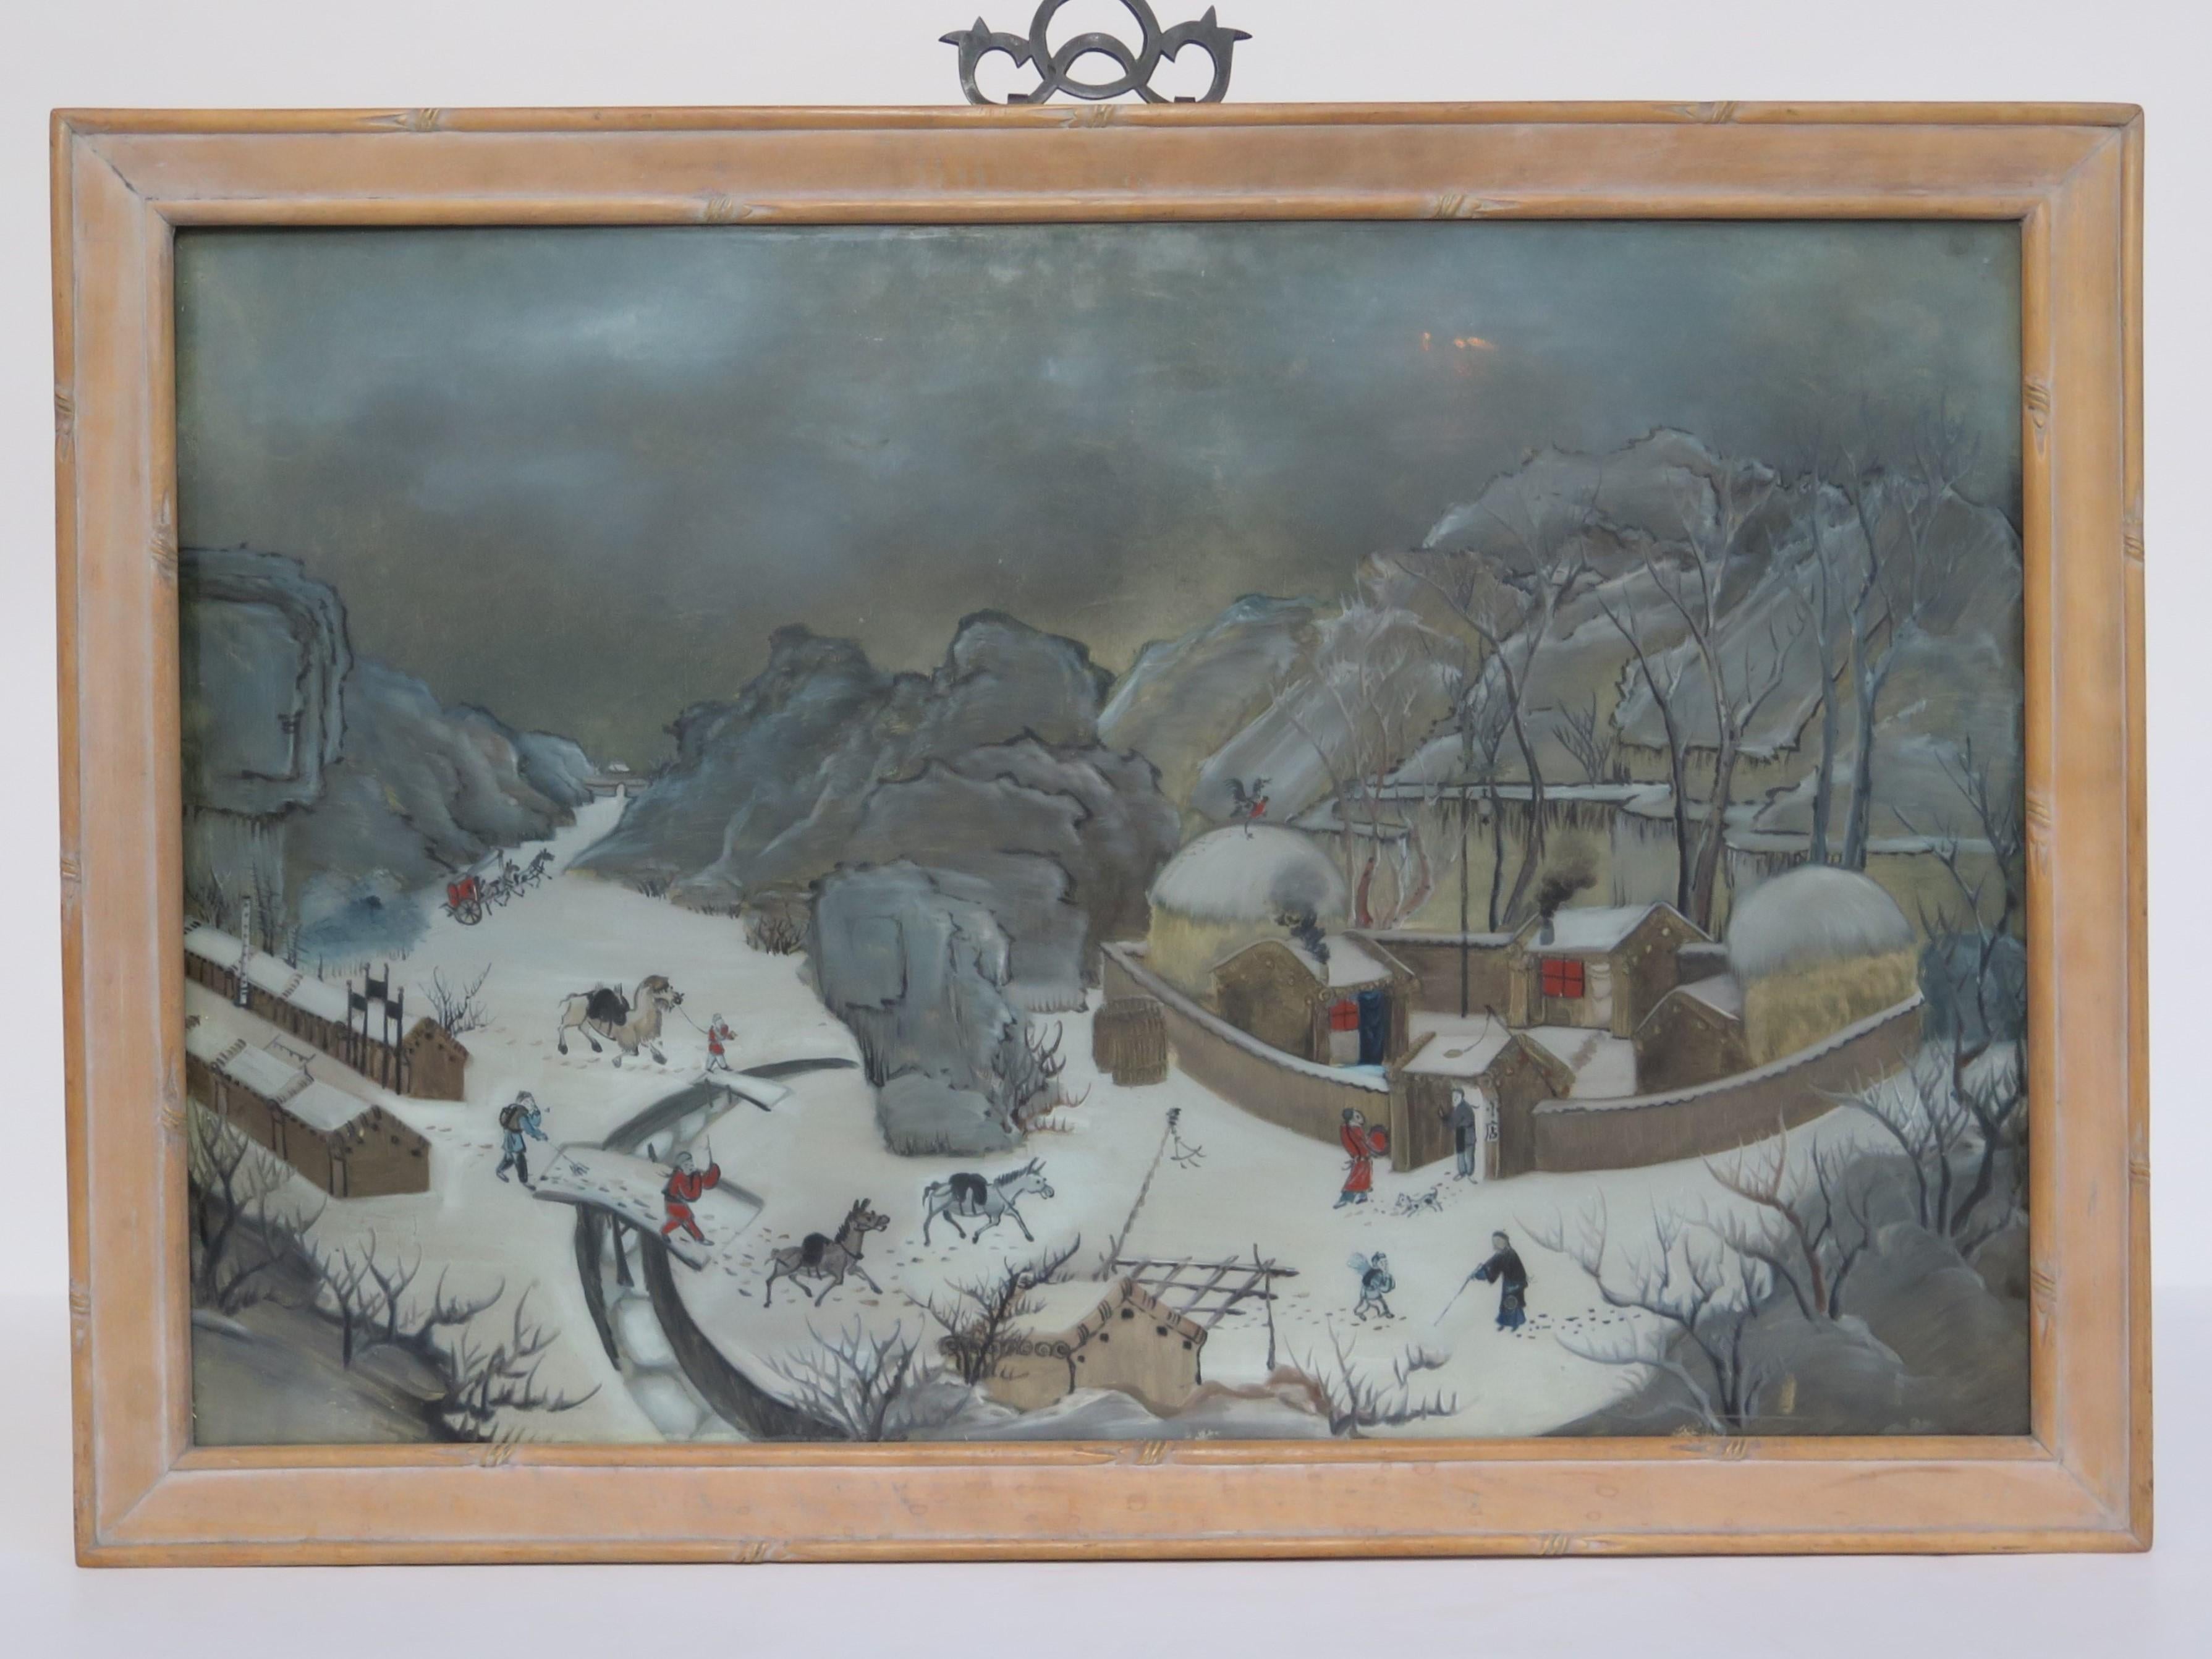 A 10th century Chinese reverse painting on glass. A snow landscape with people and houses in snow.